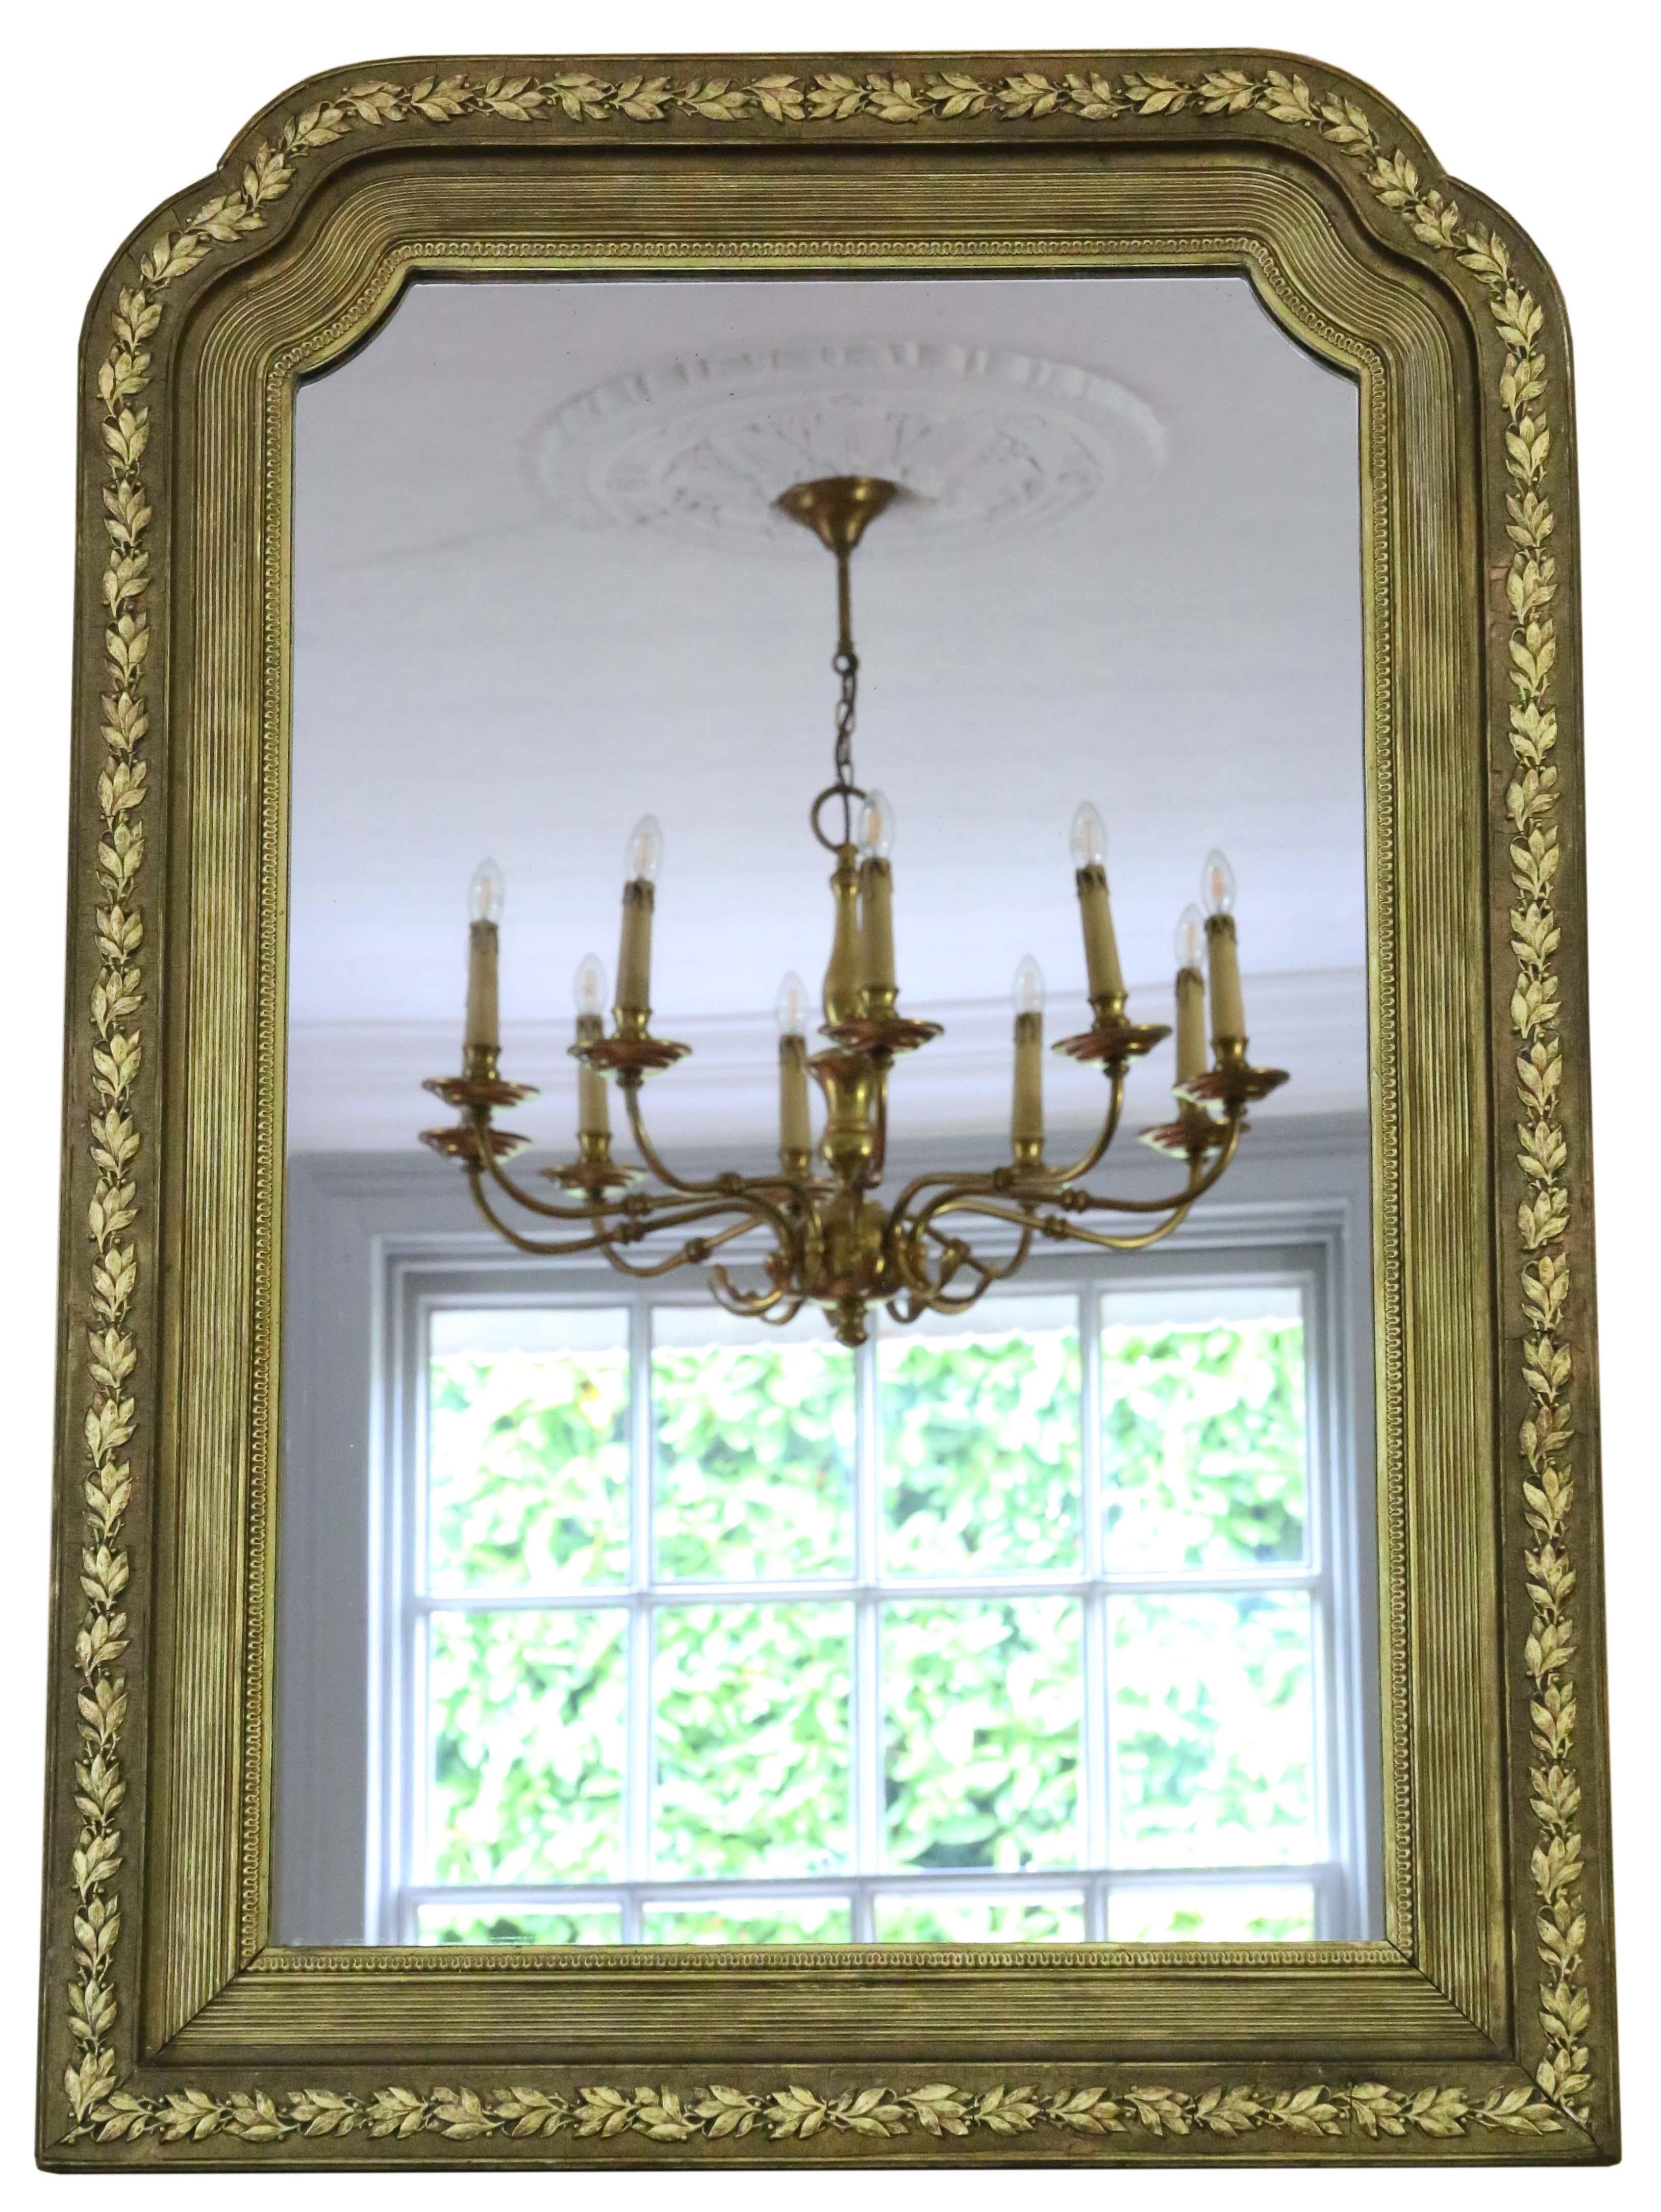 Antique shaped 19th Century large quality gilt overmantle or wall mirror. Lovely charm and elegance. Original finish with minor losses, refinishing and touching up.

This is a lovely, rare mirror. A bit different and quite special.

An impressive